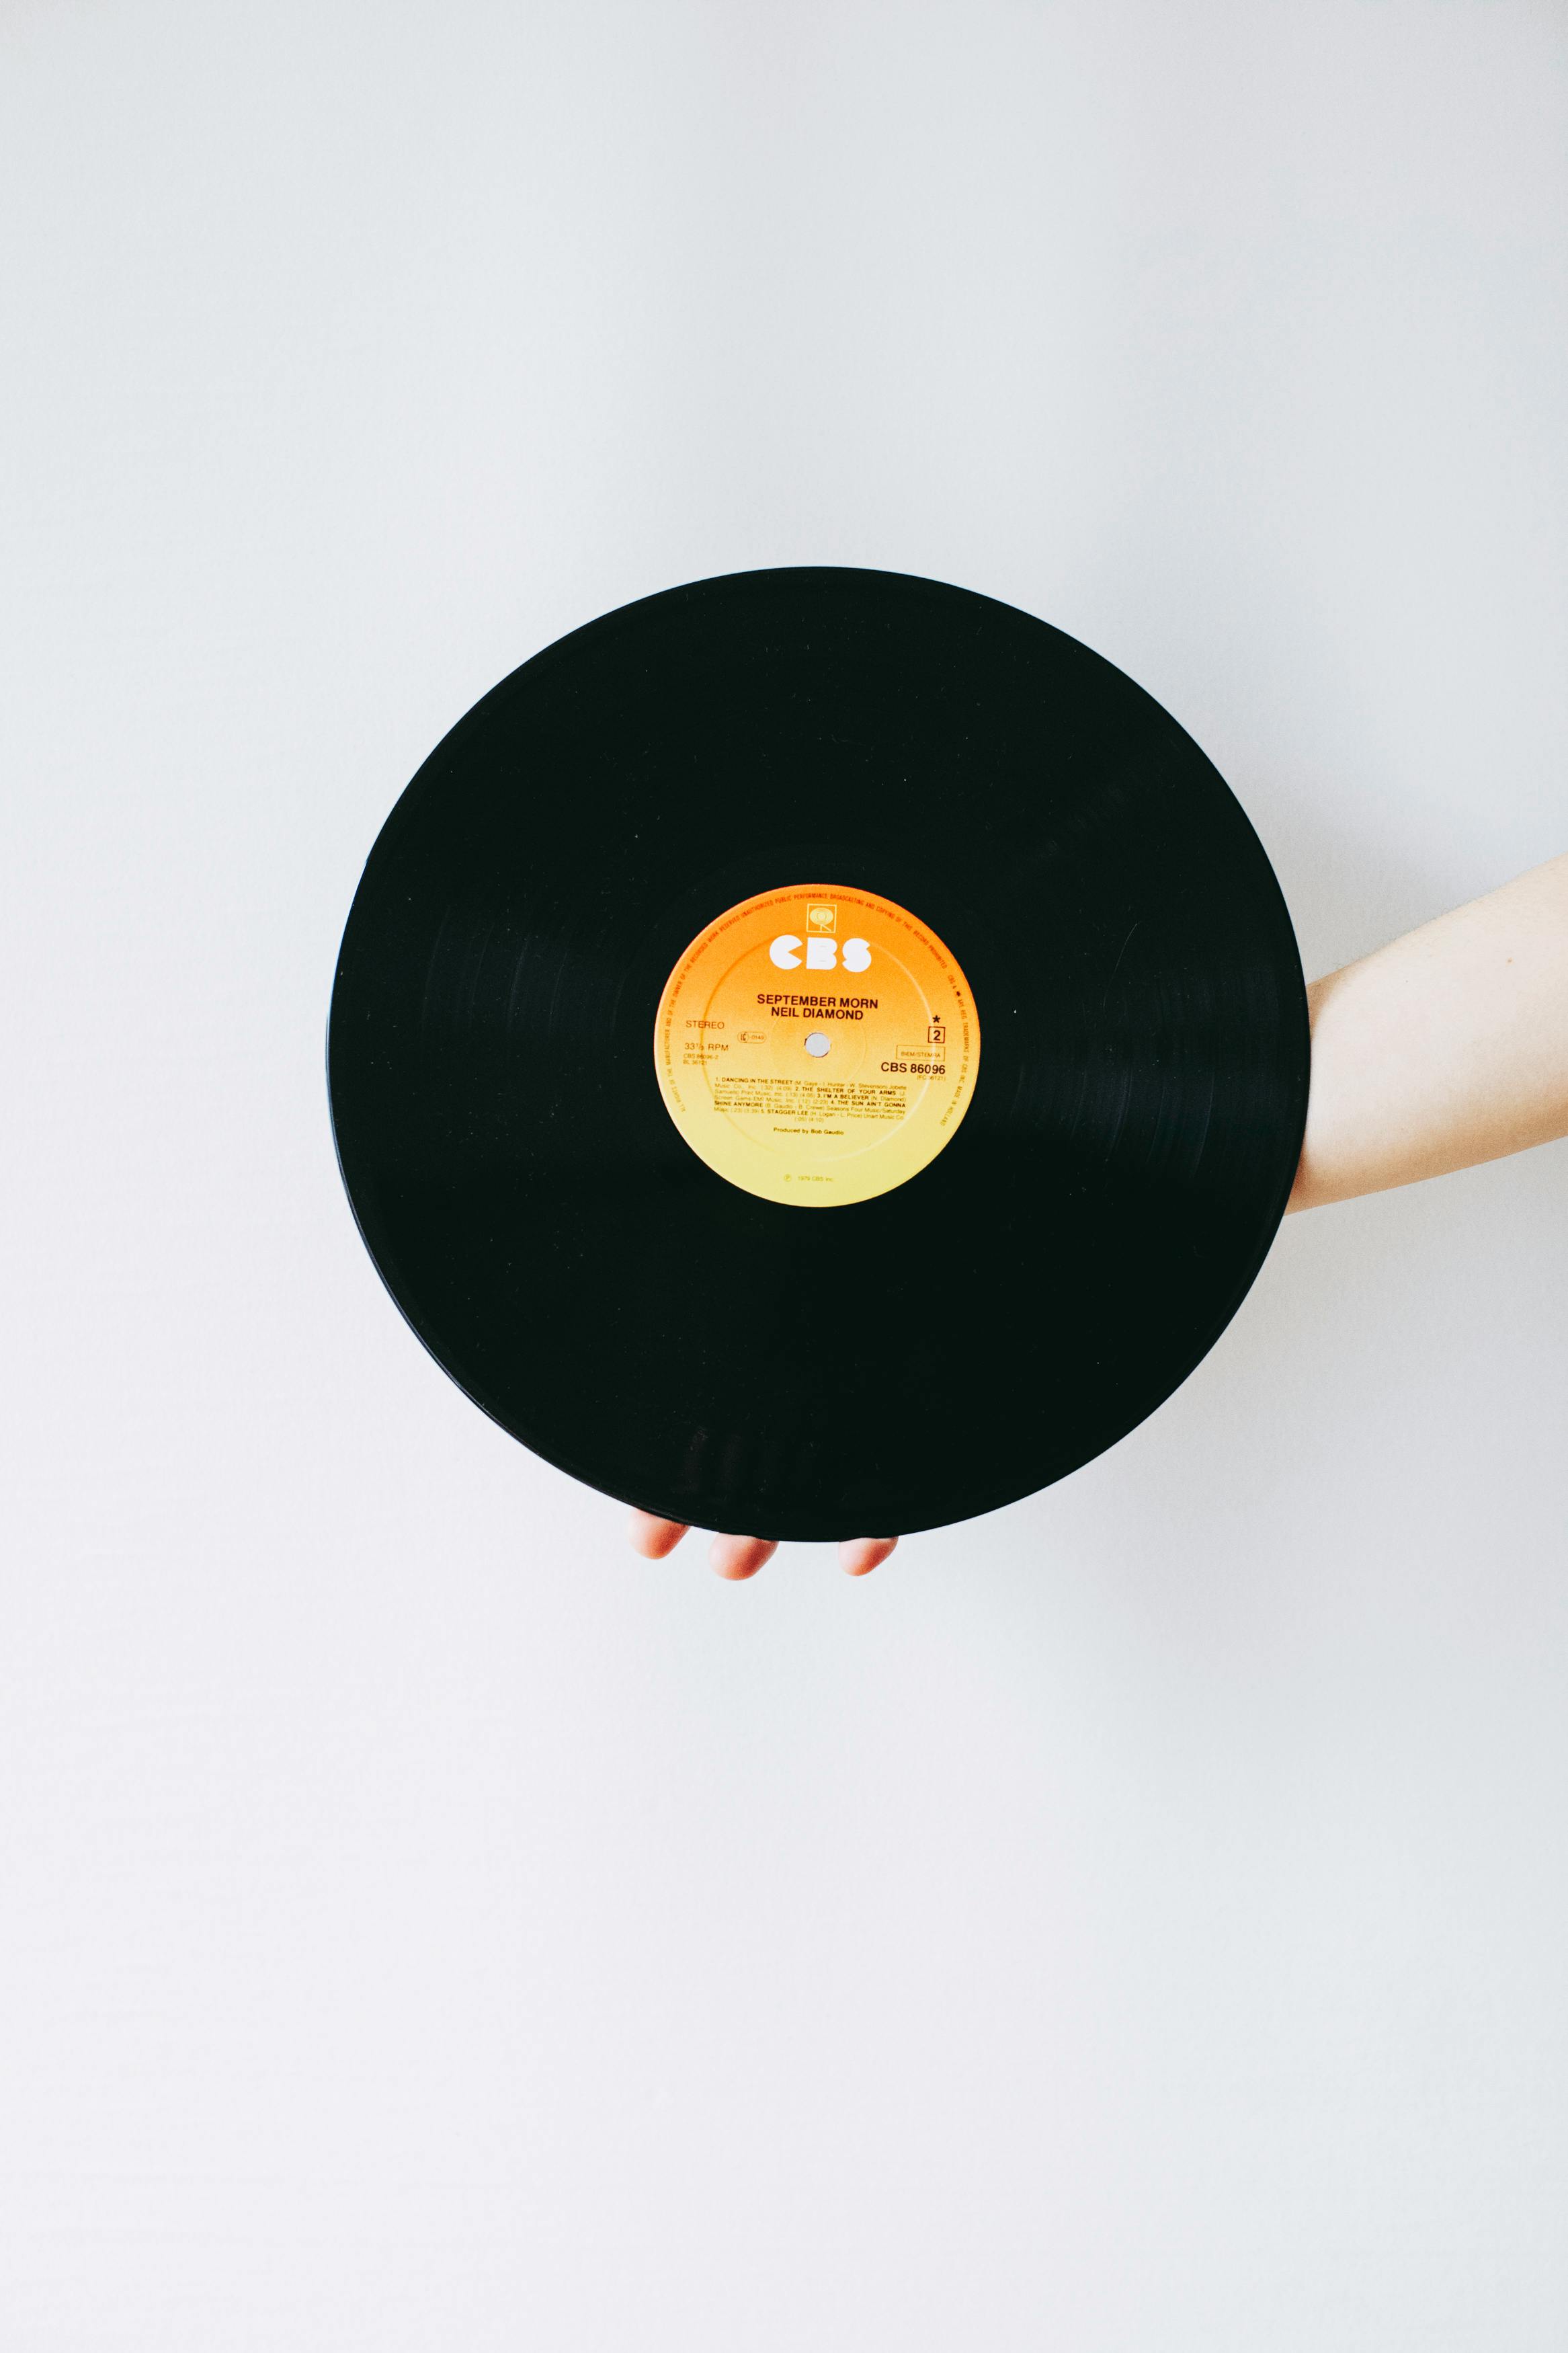 a person holding a vinyl